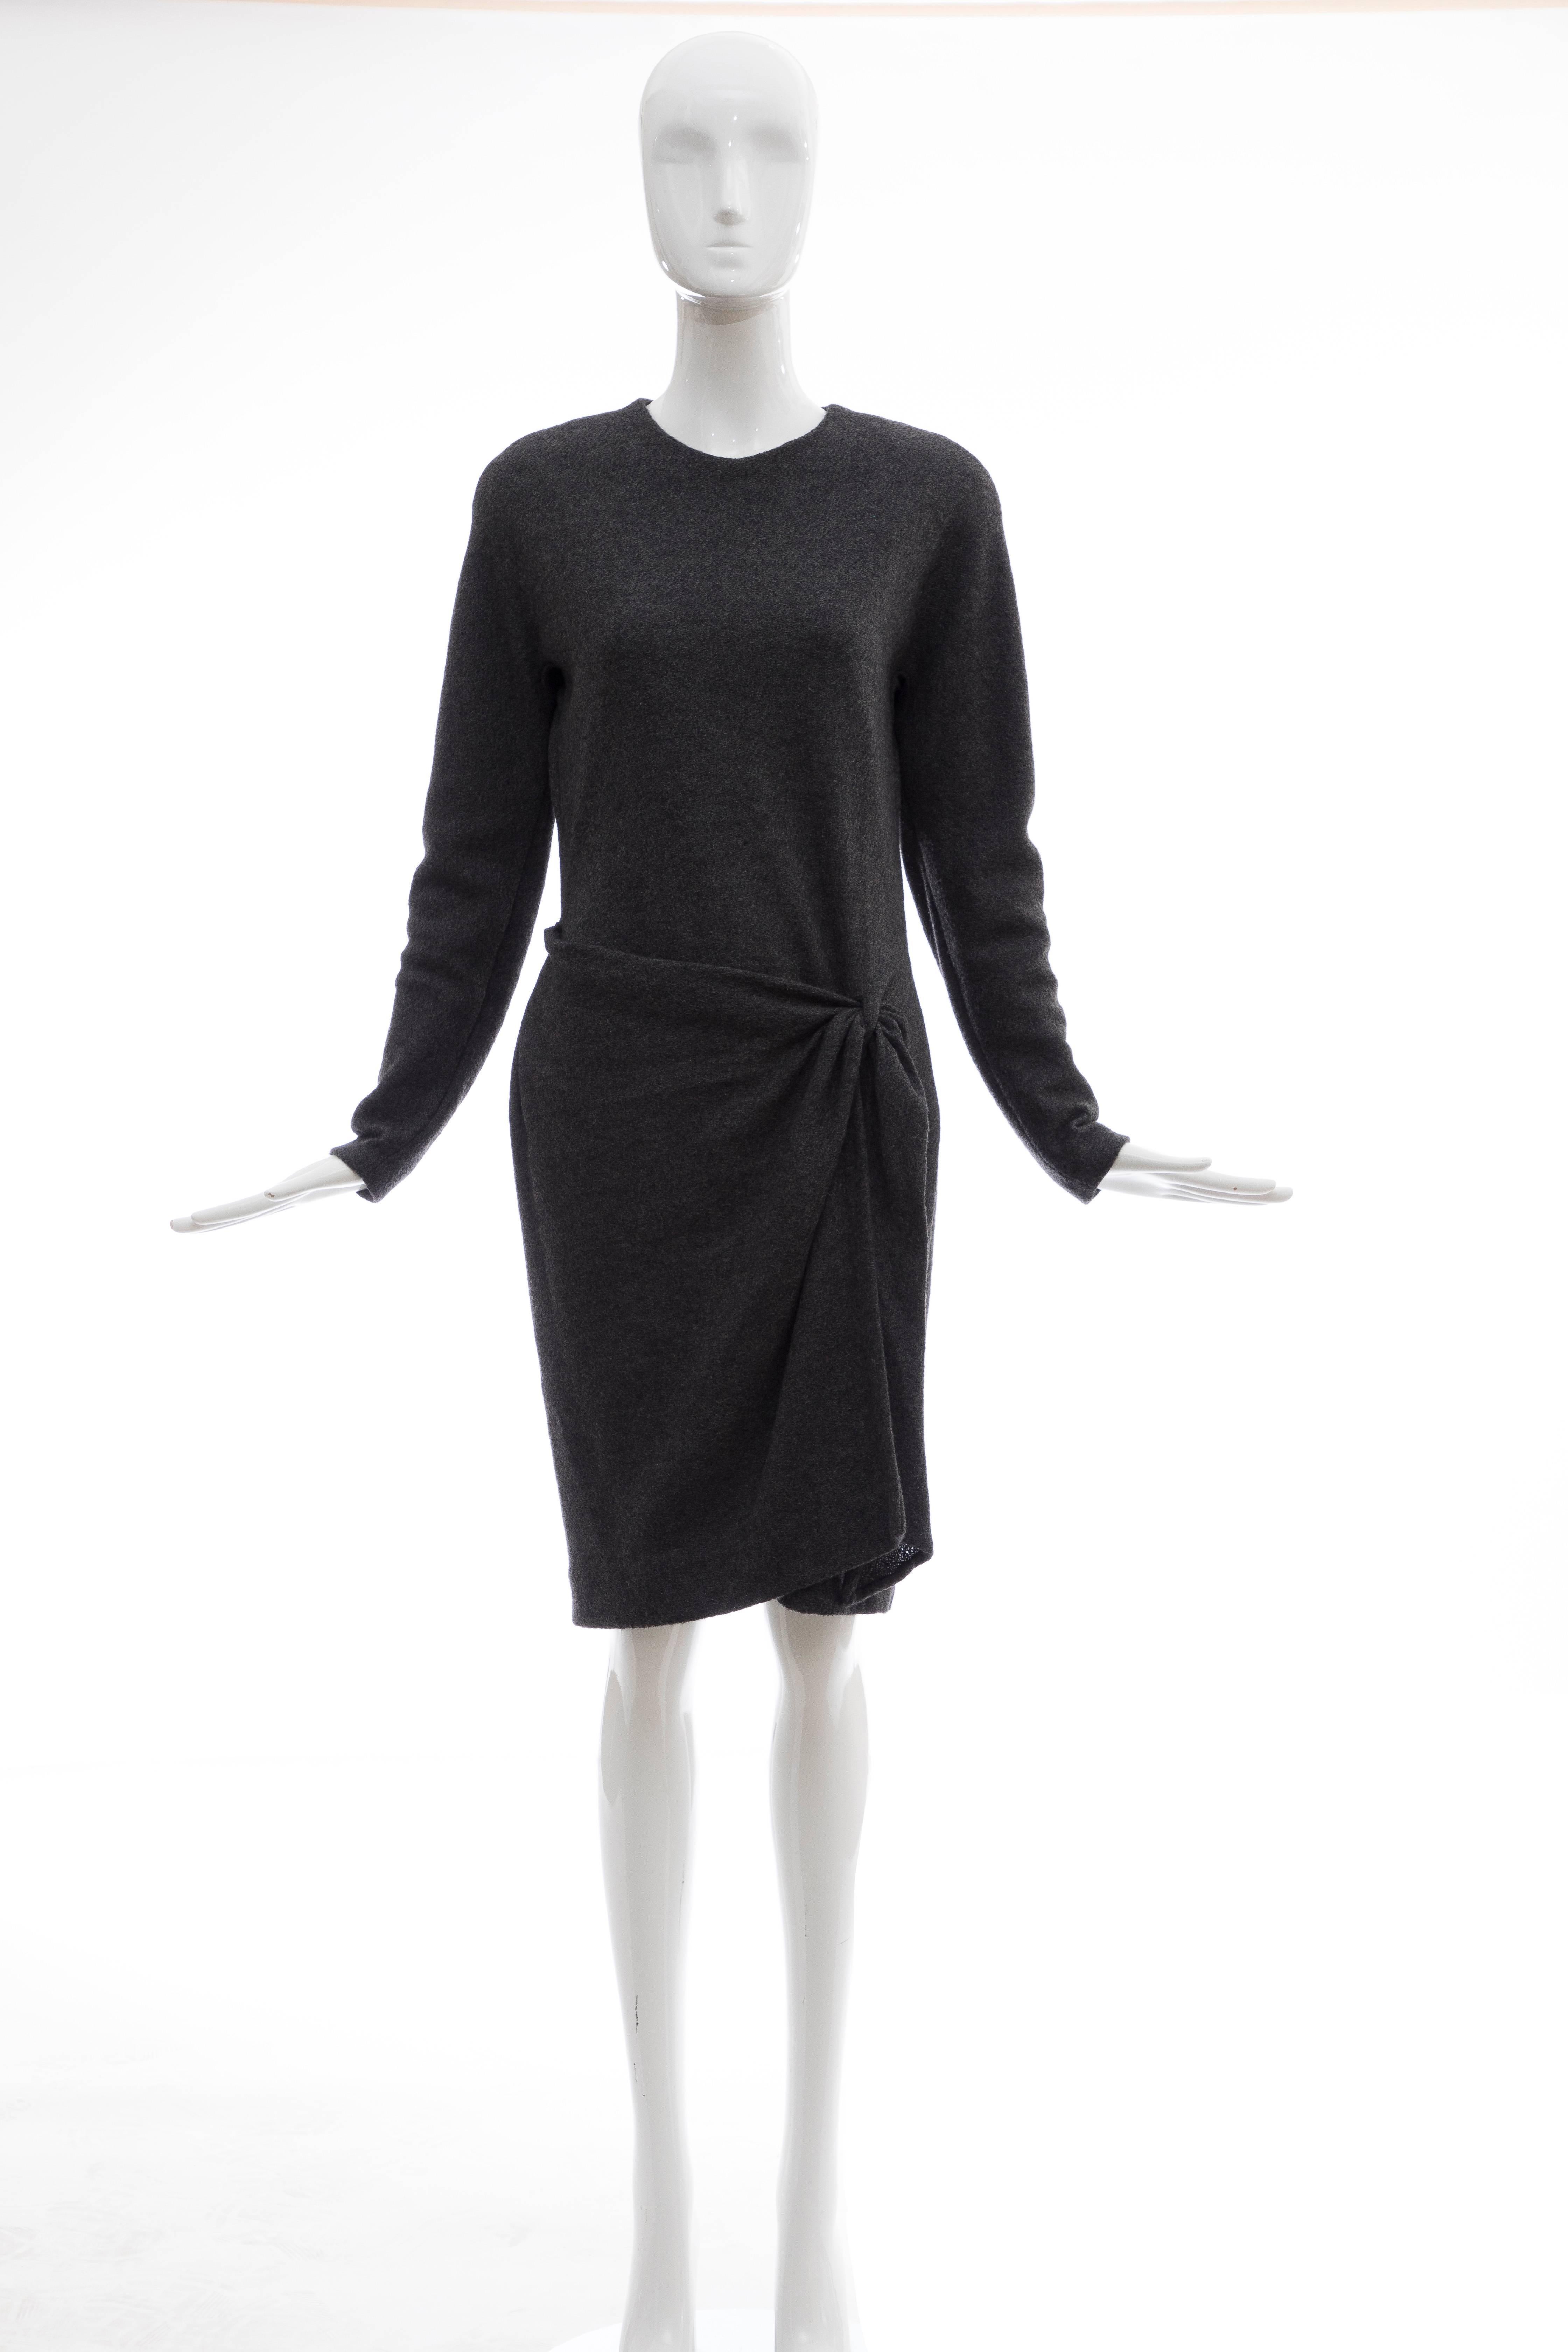 Donna Karan, Circa 1980's Alpaca Wool Crepe Jersey Charcoal Grey long sleeve wrap dress with jewel neckline, back zip and fully lined.

Bust 36, Waist 28, Hips 33, Length 39.5

US. 10 fits a modern size 8